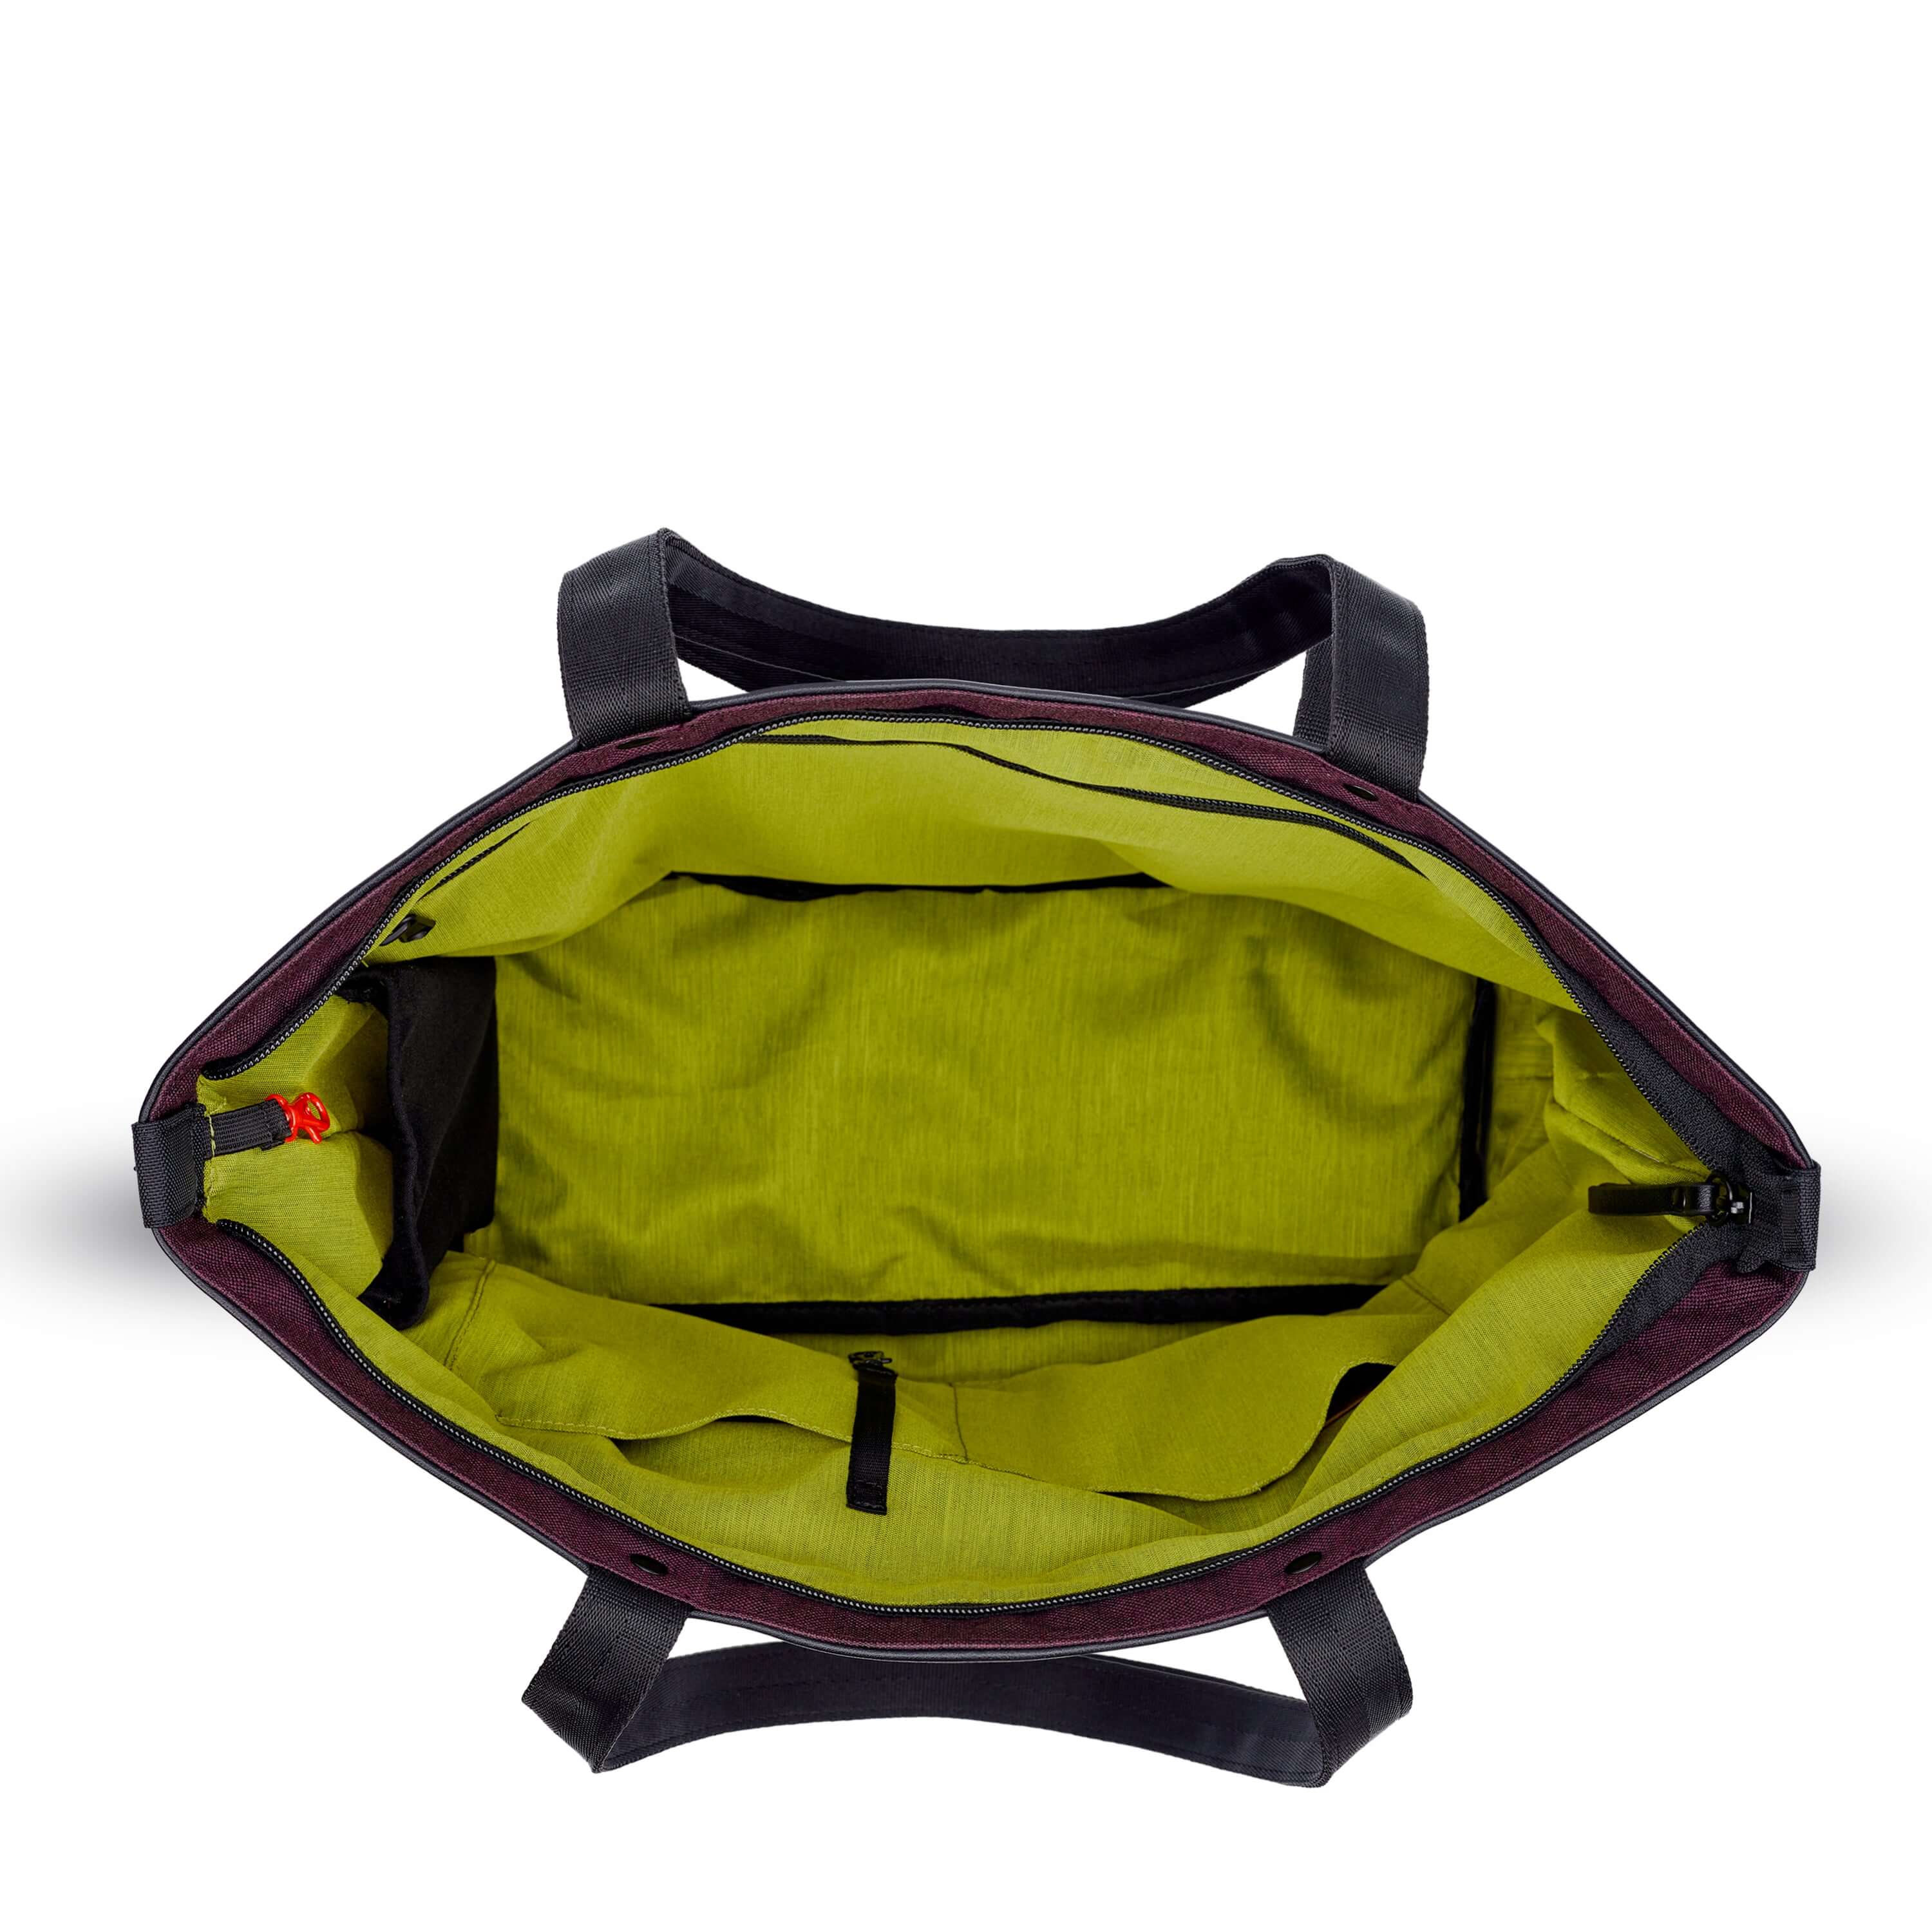 Top view of Sherpani's Anti-Theft tote the Cali AT in Merlot. The main zipper compartment is open to reveal a lime green interior, an internal water bottle holder and a red carabiner that acts as the zipper lock. 